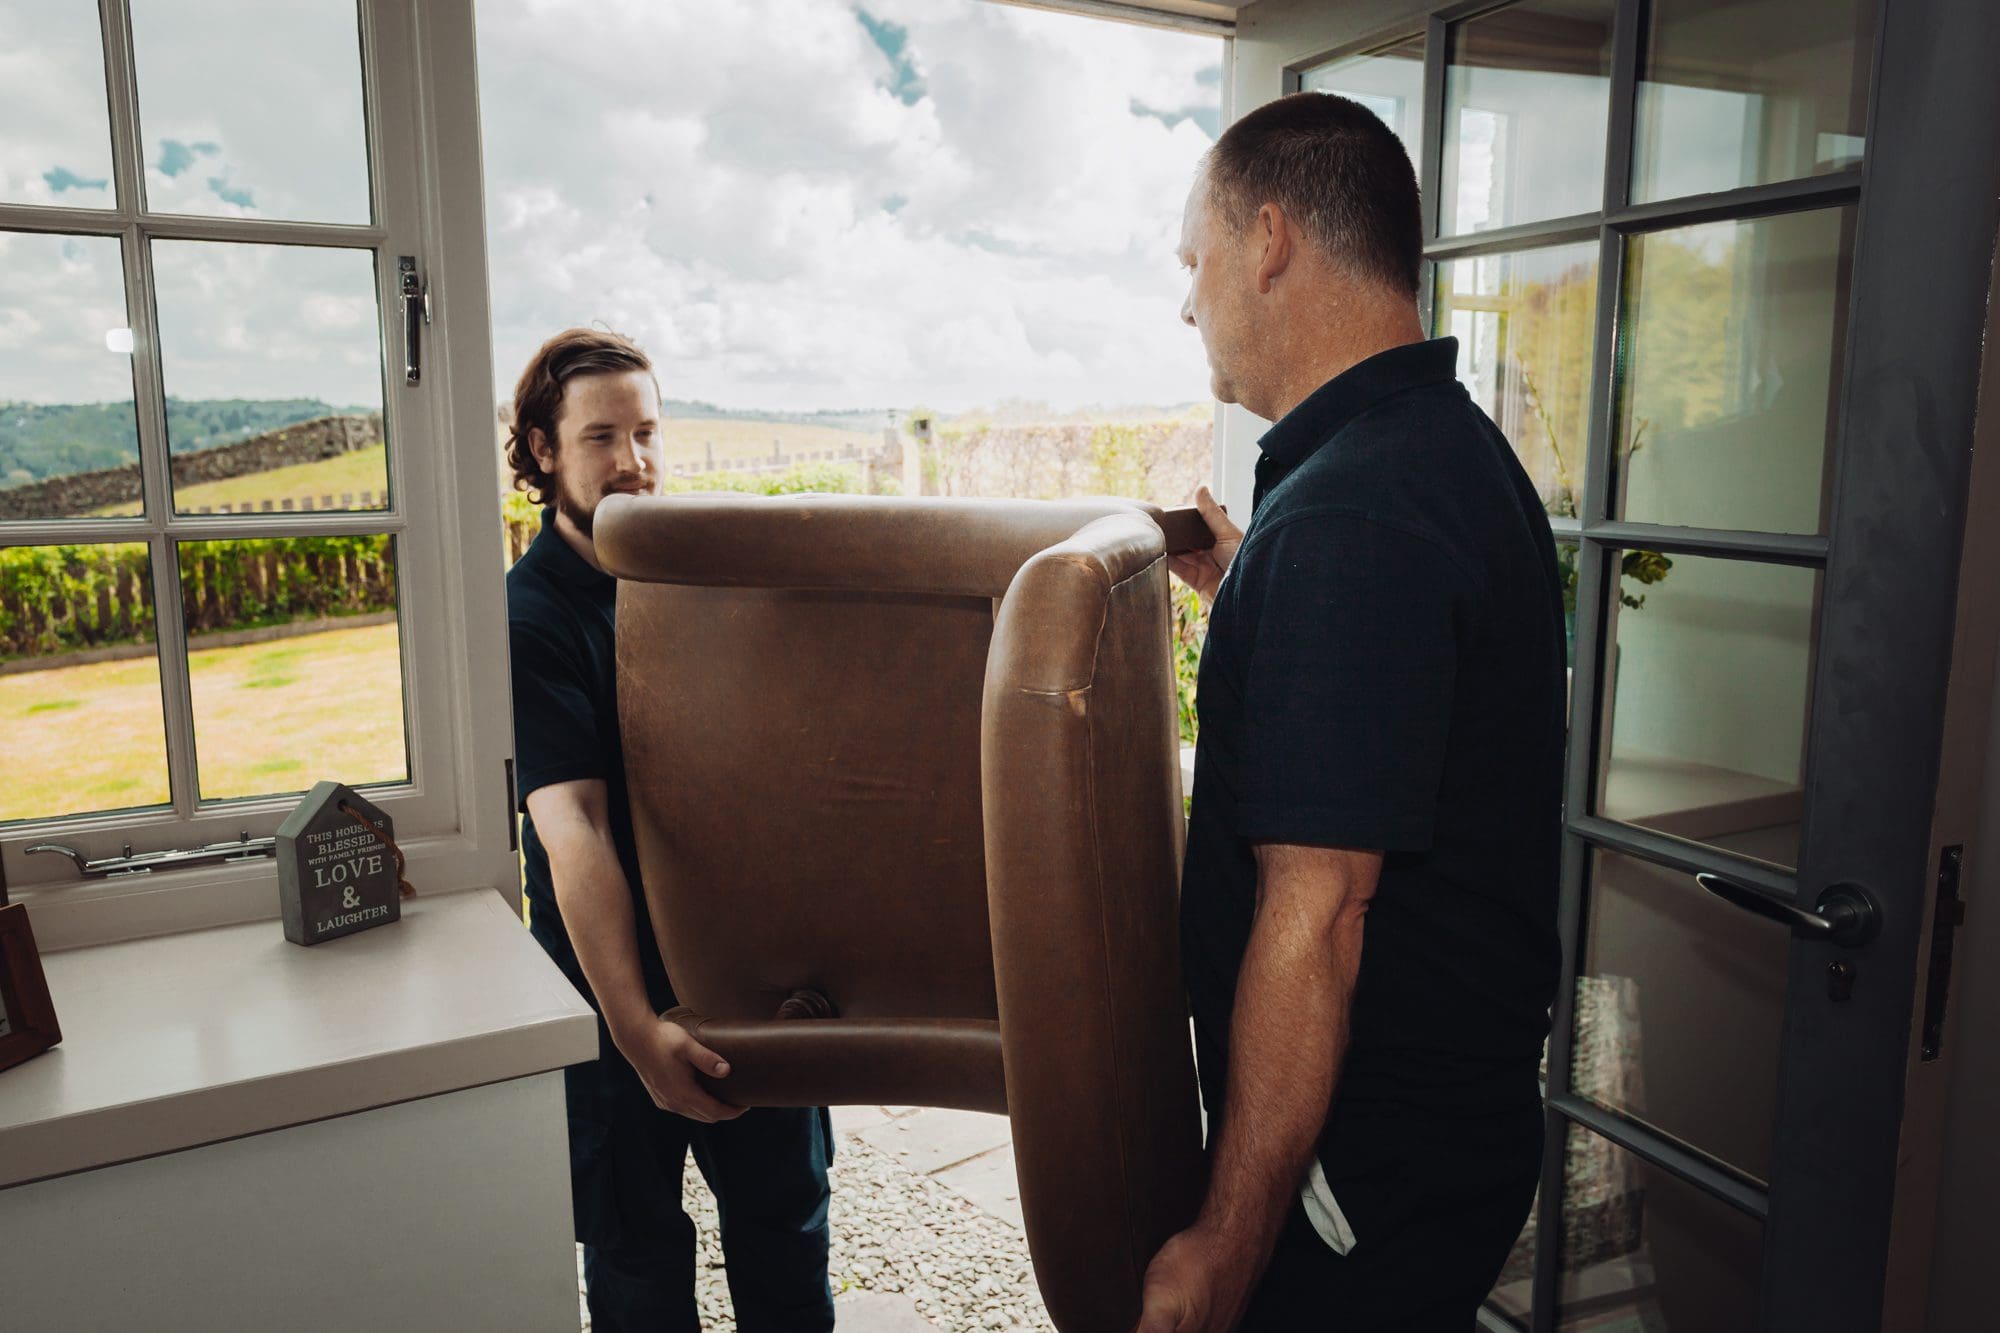 two men carrying a sofa chair at the door going outside.